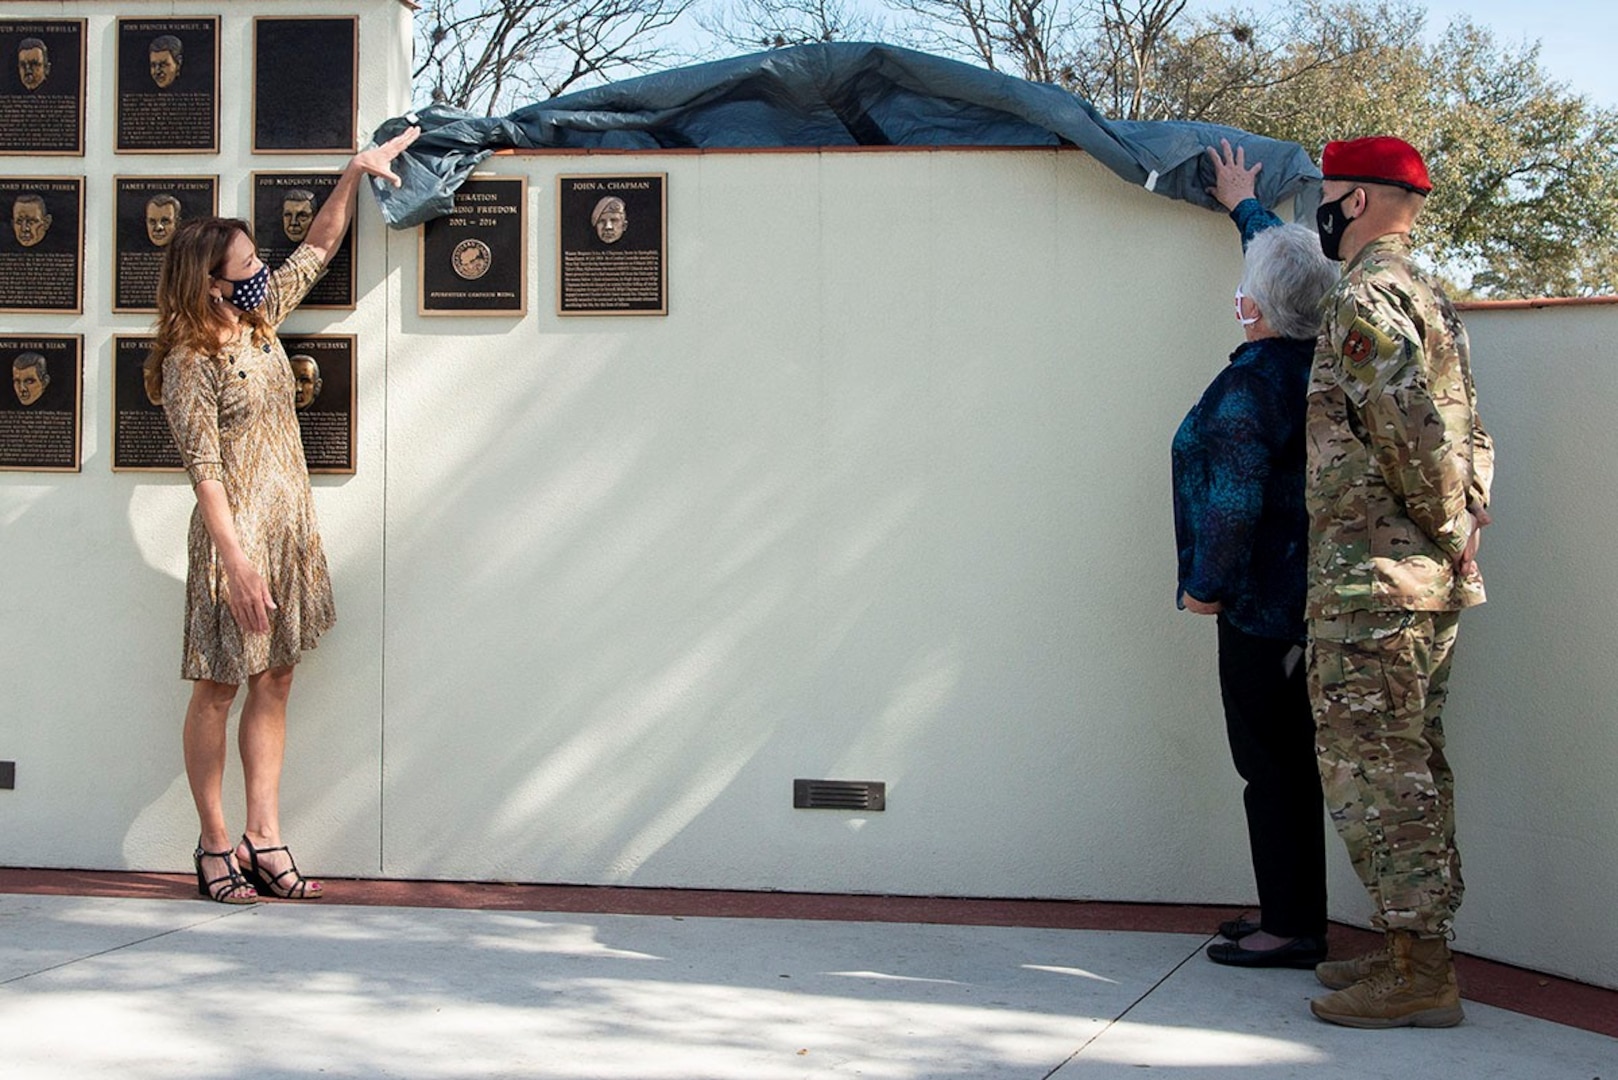 (left to right) Valerie Nessel, John Chapman’s spouse; Terry Chapman, John Chapman’s mother; and U.S. Air Force Col. Mason Dula, Special Warfare Training Wing commander, unveil the Master Sgt. John Chapman Medal of Honor plaque during a ceremony at Airmen’s Heritage Park at Joint Base San Antonio-Randolph March 4, 2021.